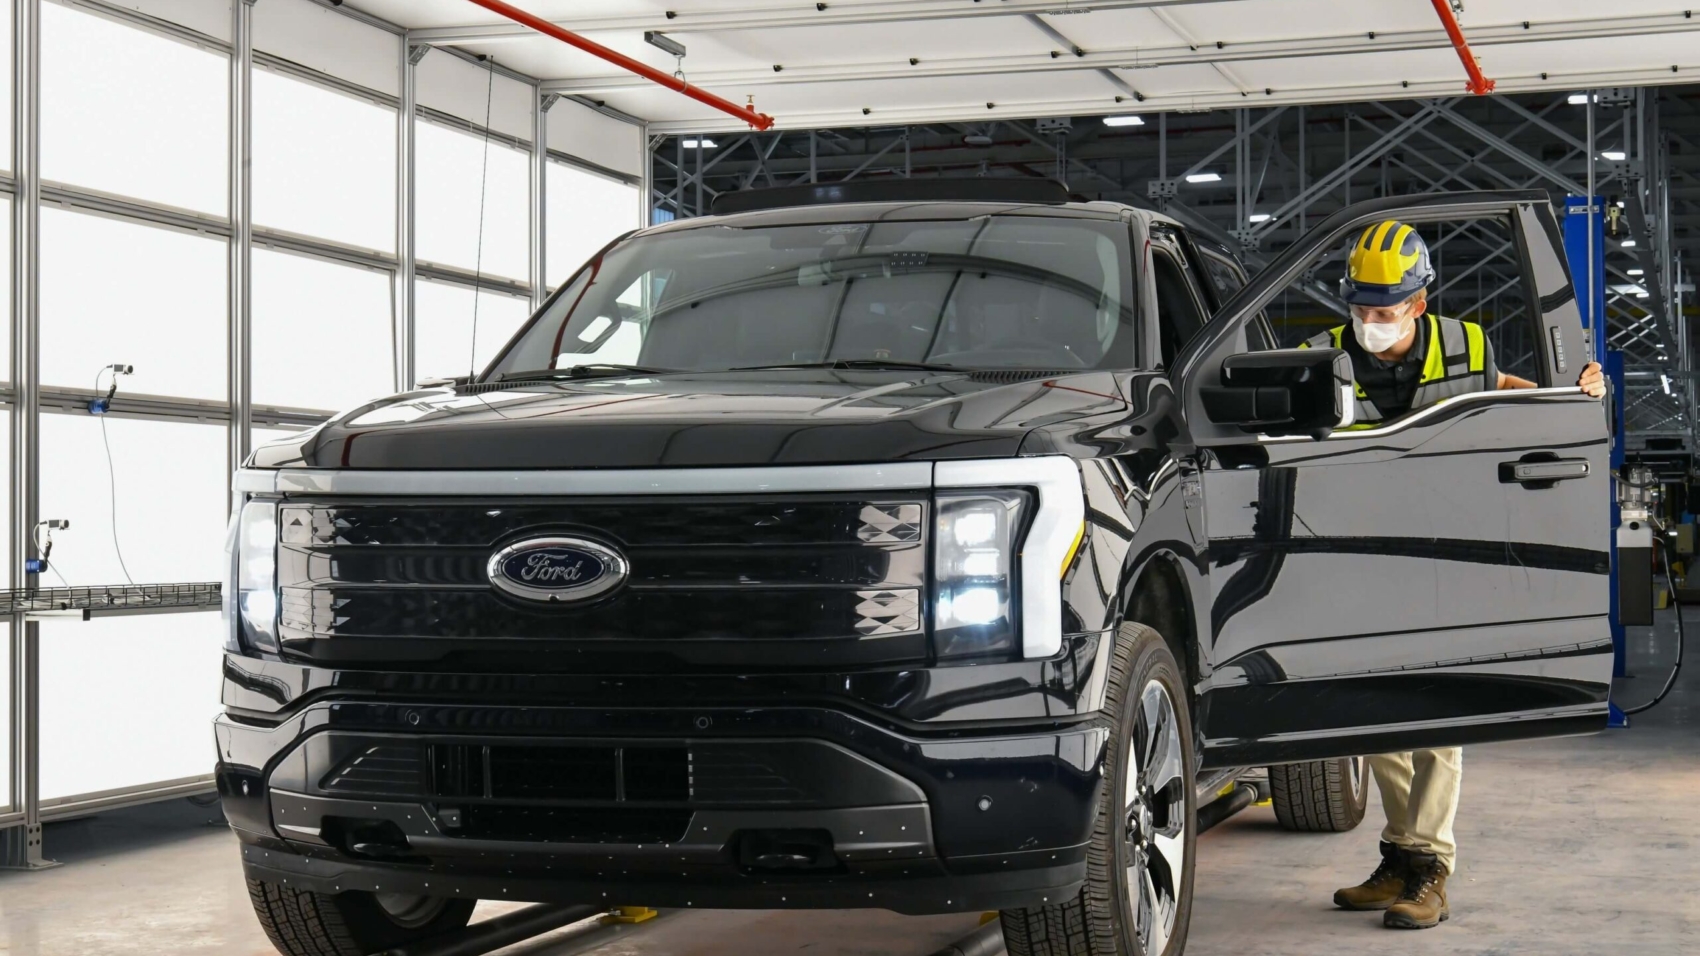 Ford F-150 Lightning pre-production